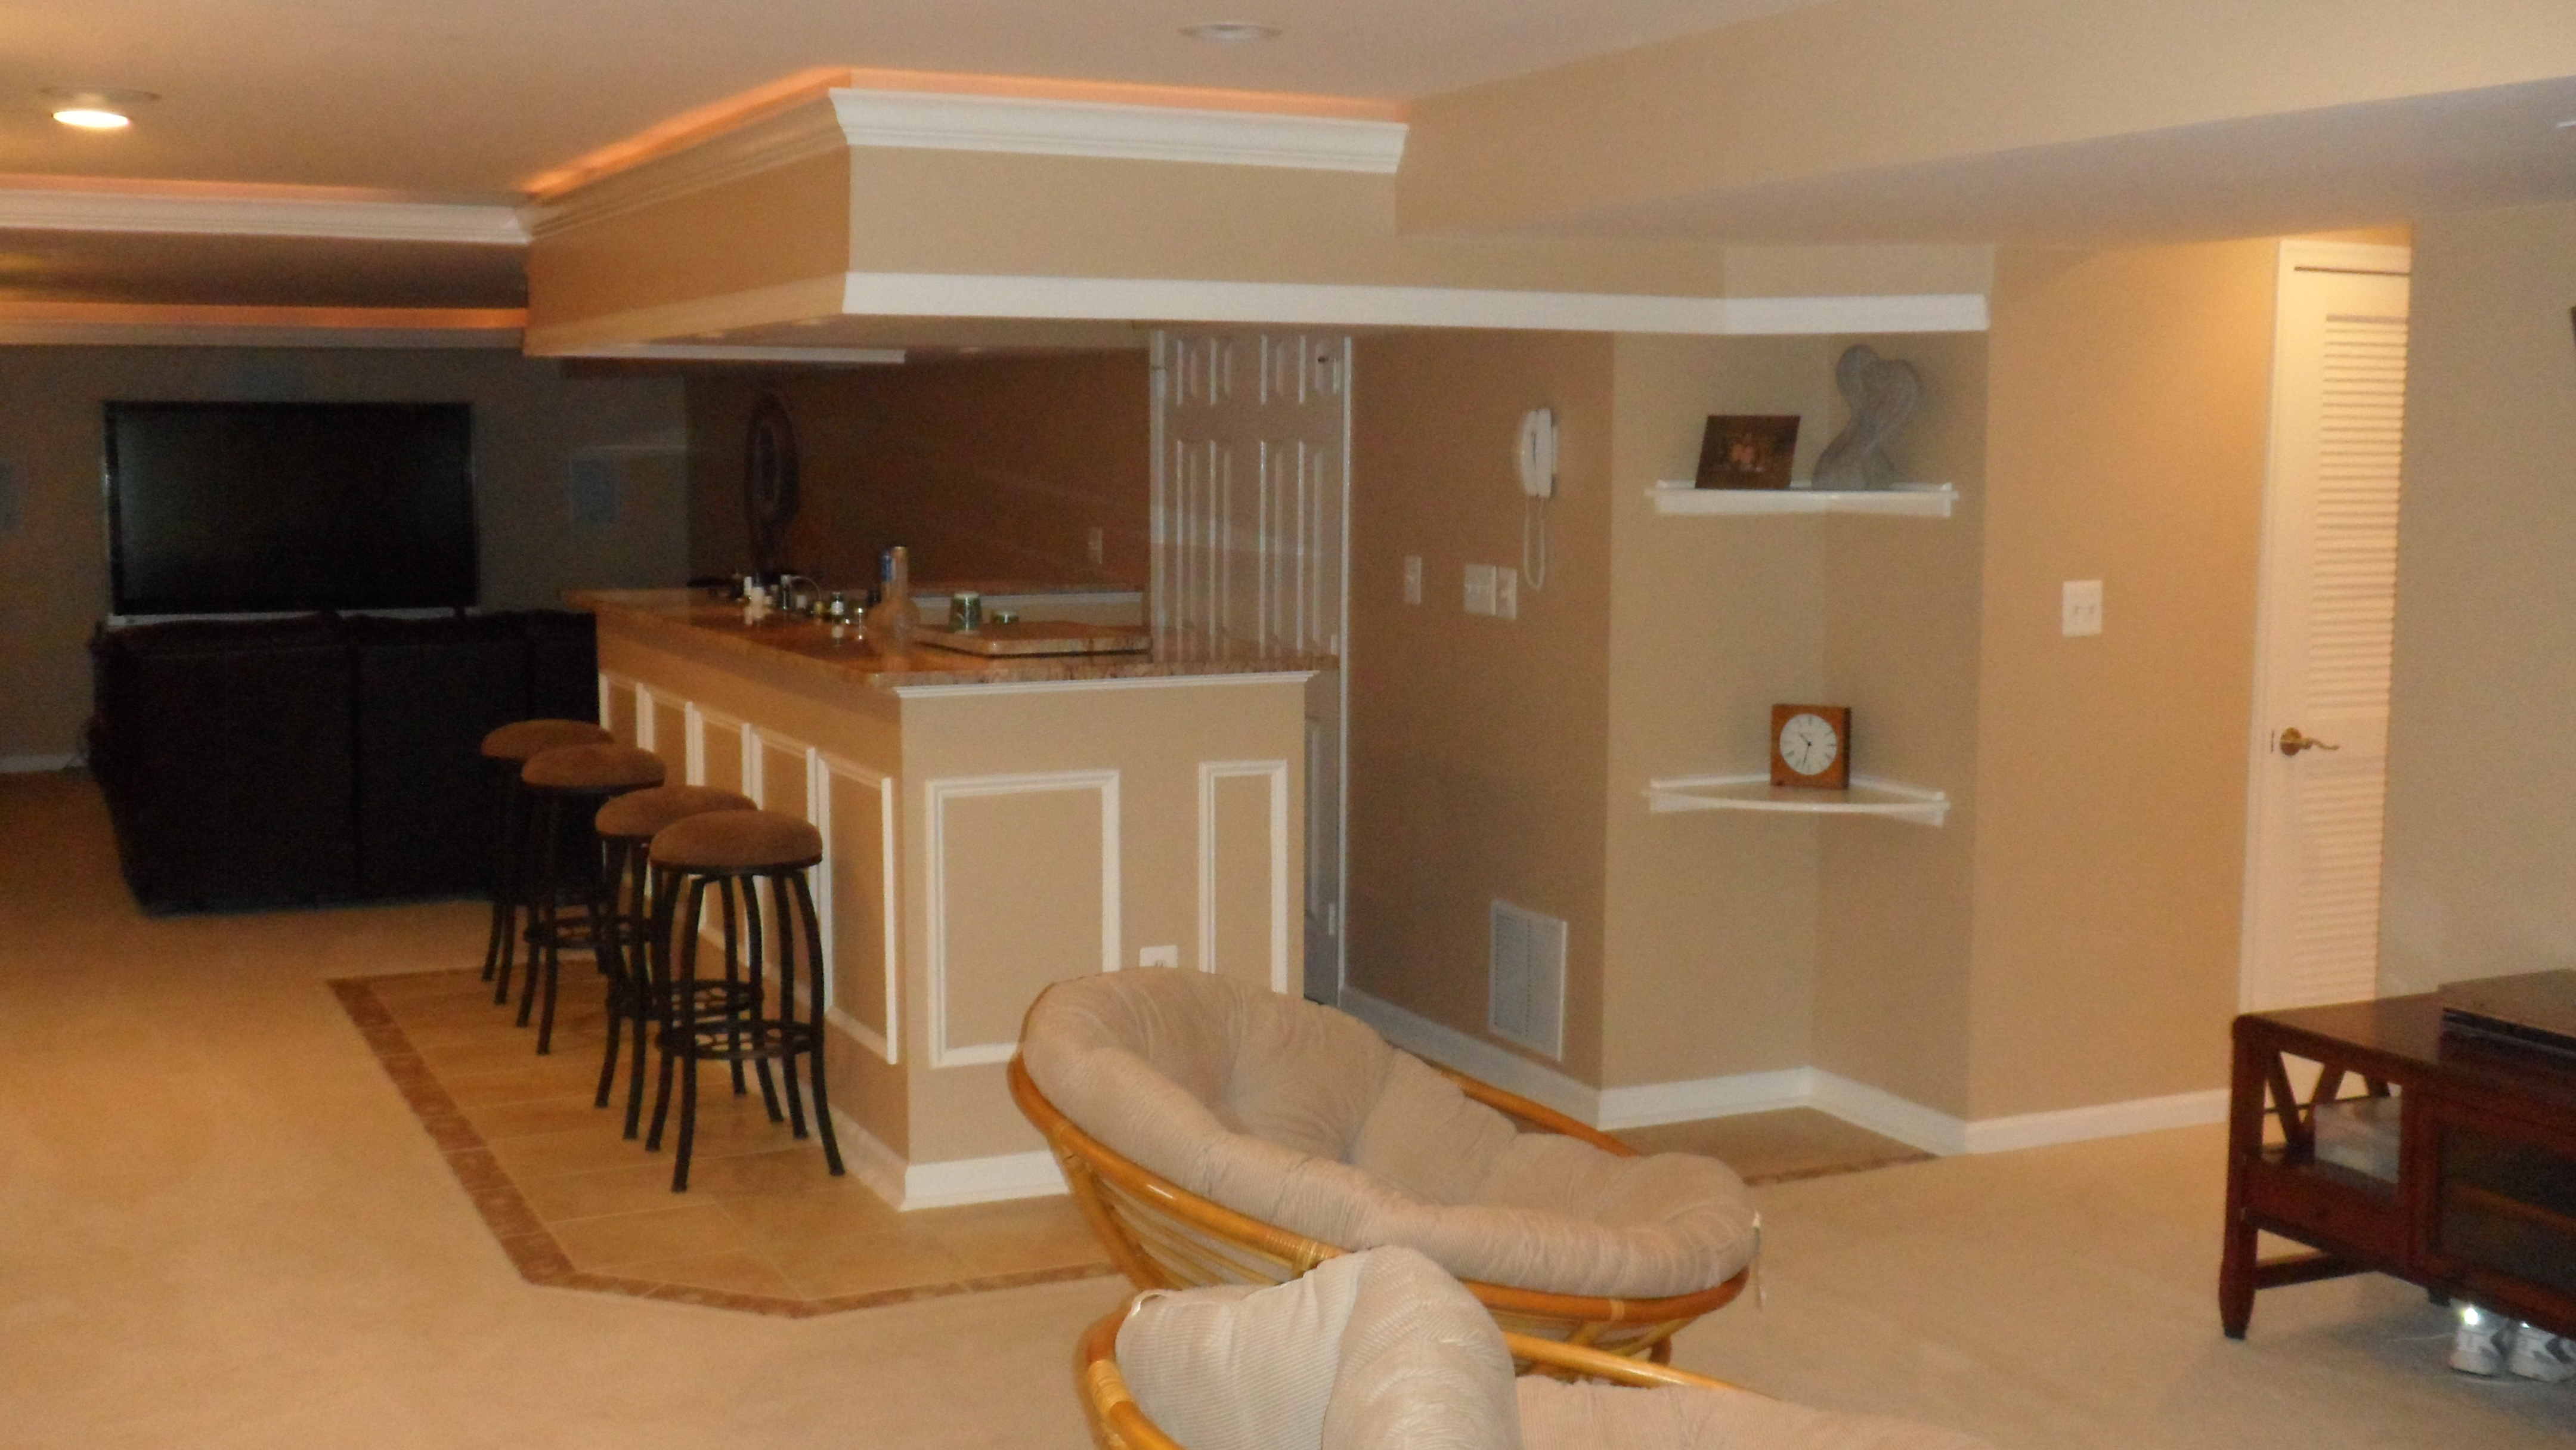 Basements Remodeling Contractors In DC And Northern Virginia